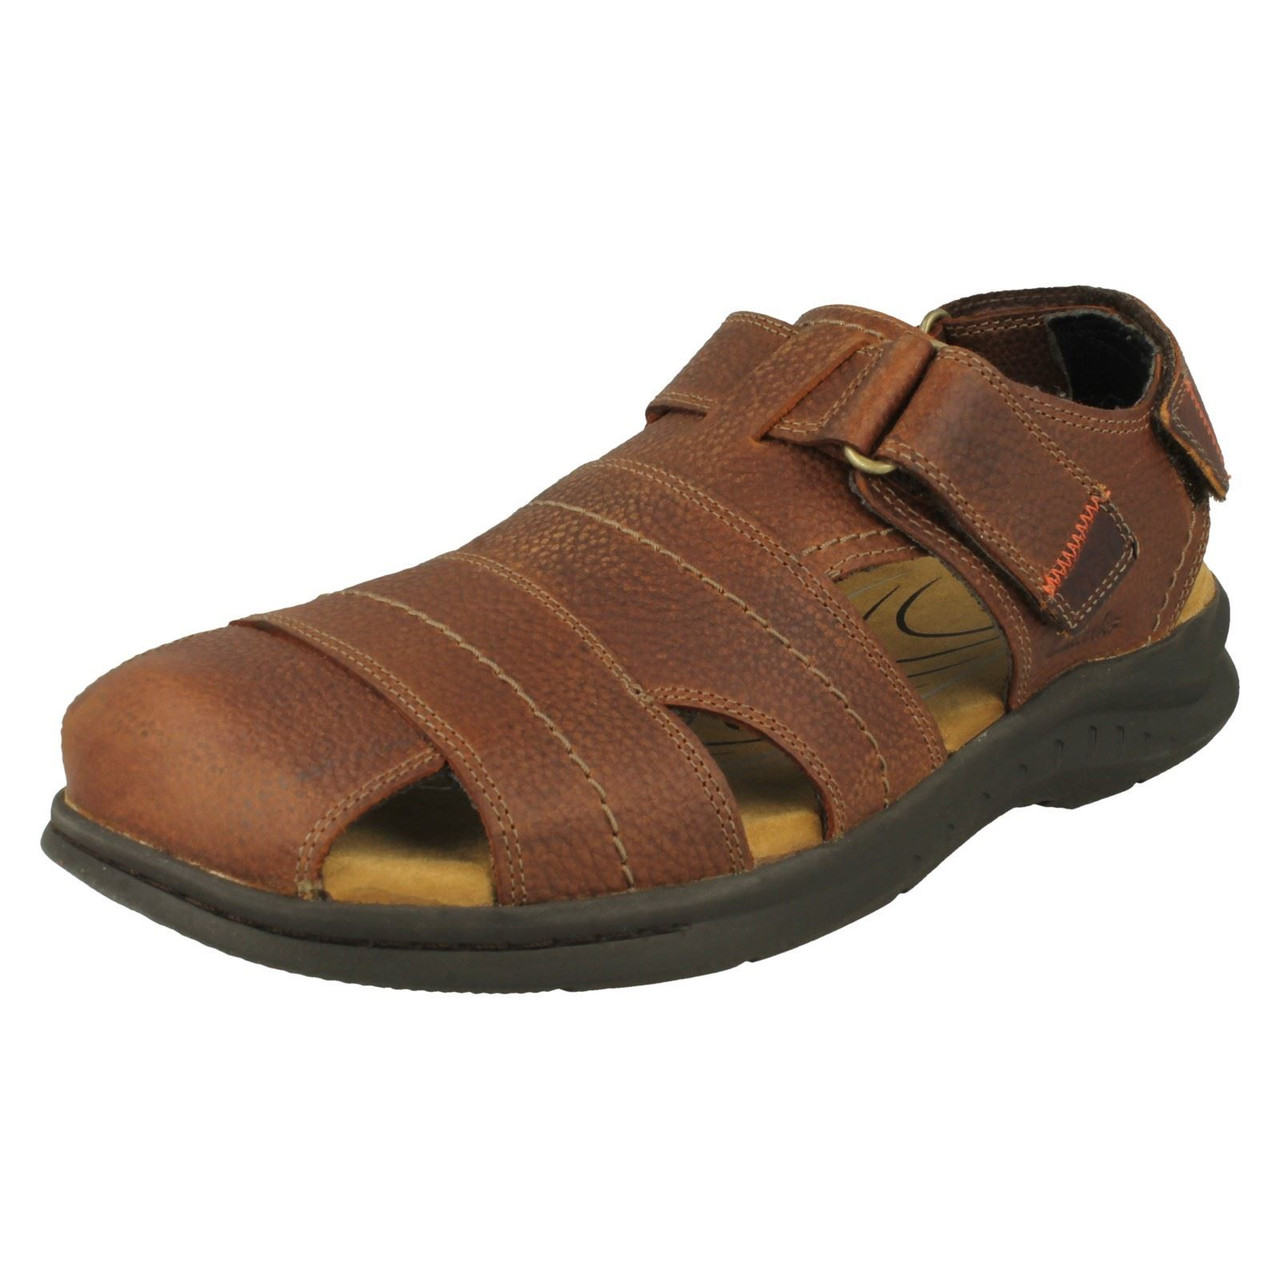 Mens Clarks Closed Toe Strappy Sandals Hapsford Cove